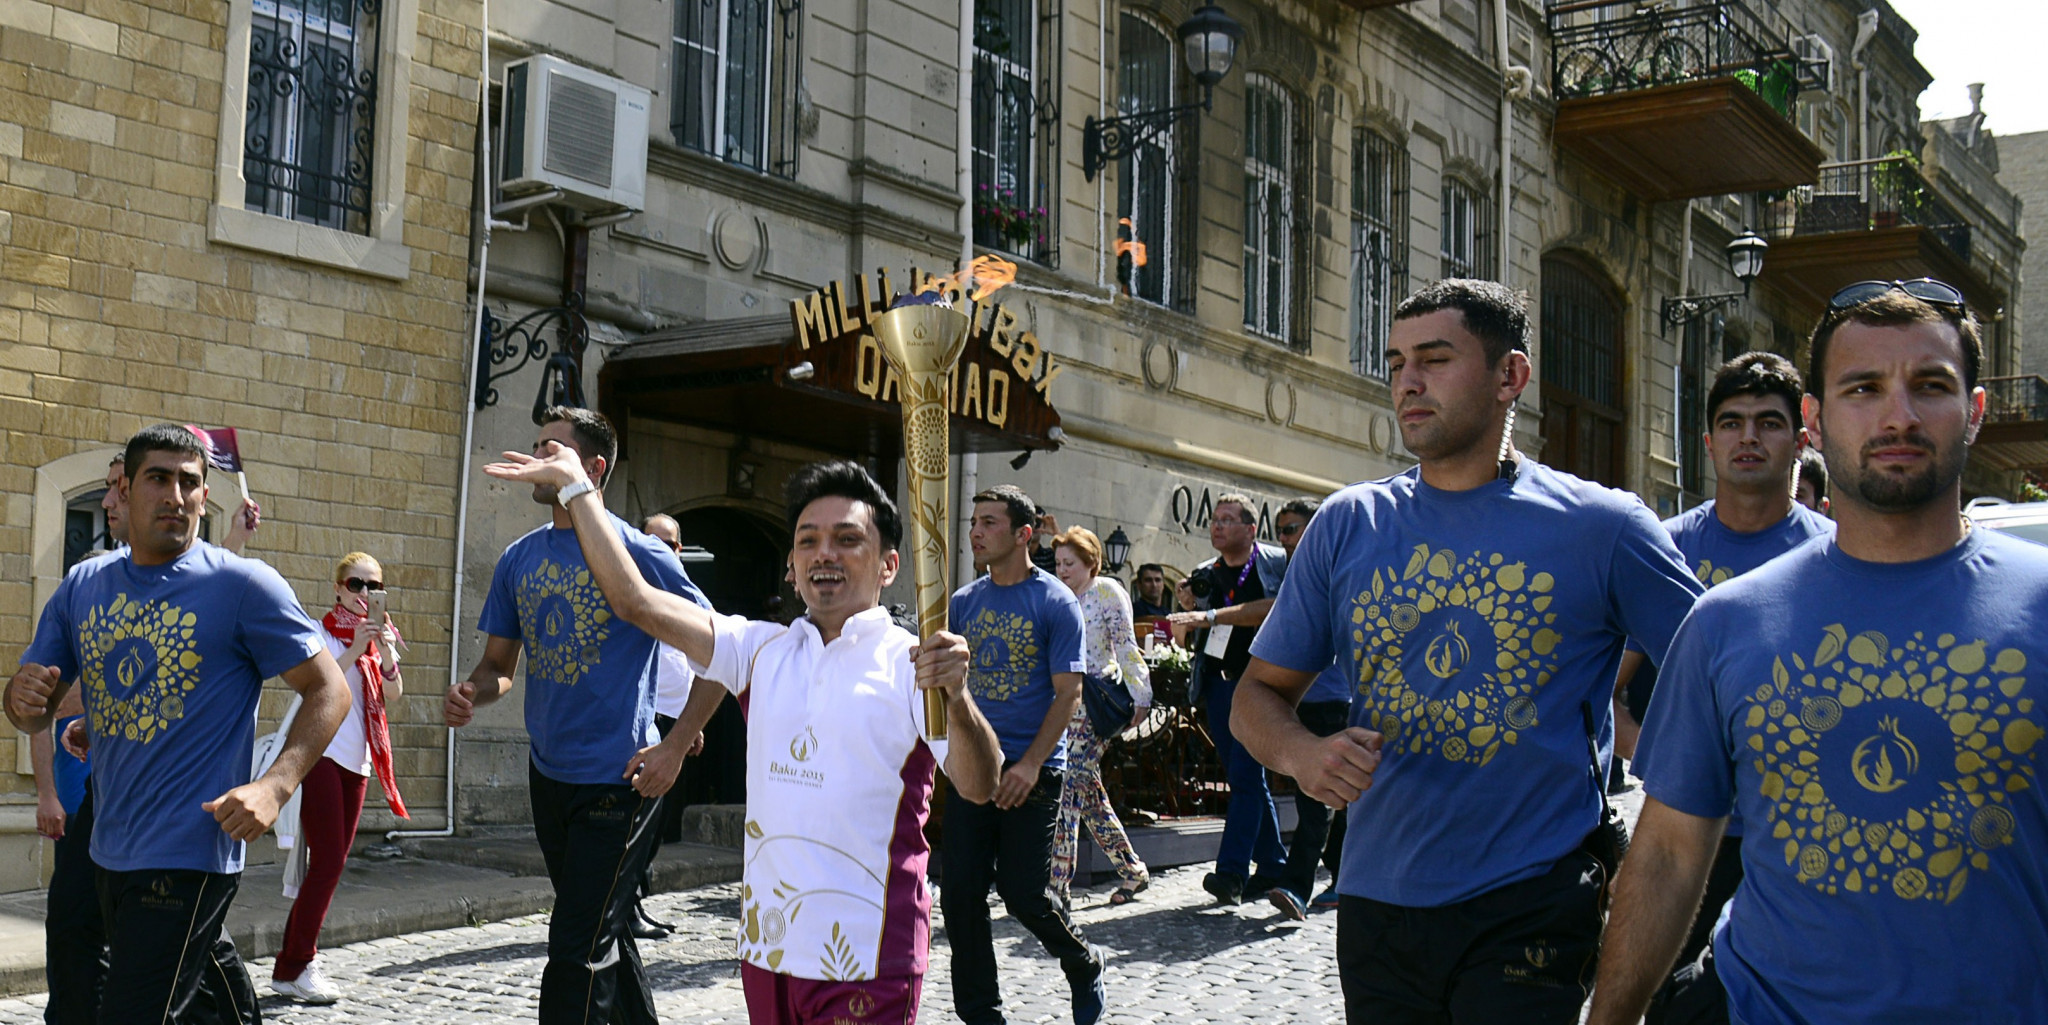 Minsk 2019 will follow Baku 2015 in holding a Torch Relay for the European Games ©Getty Images
